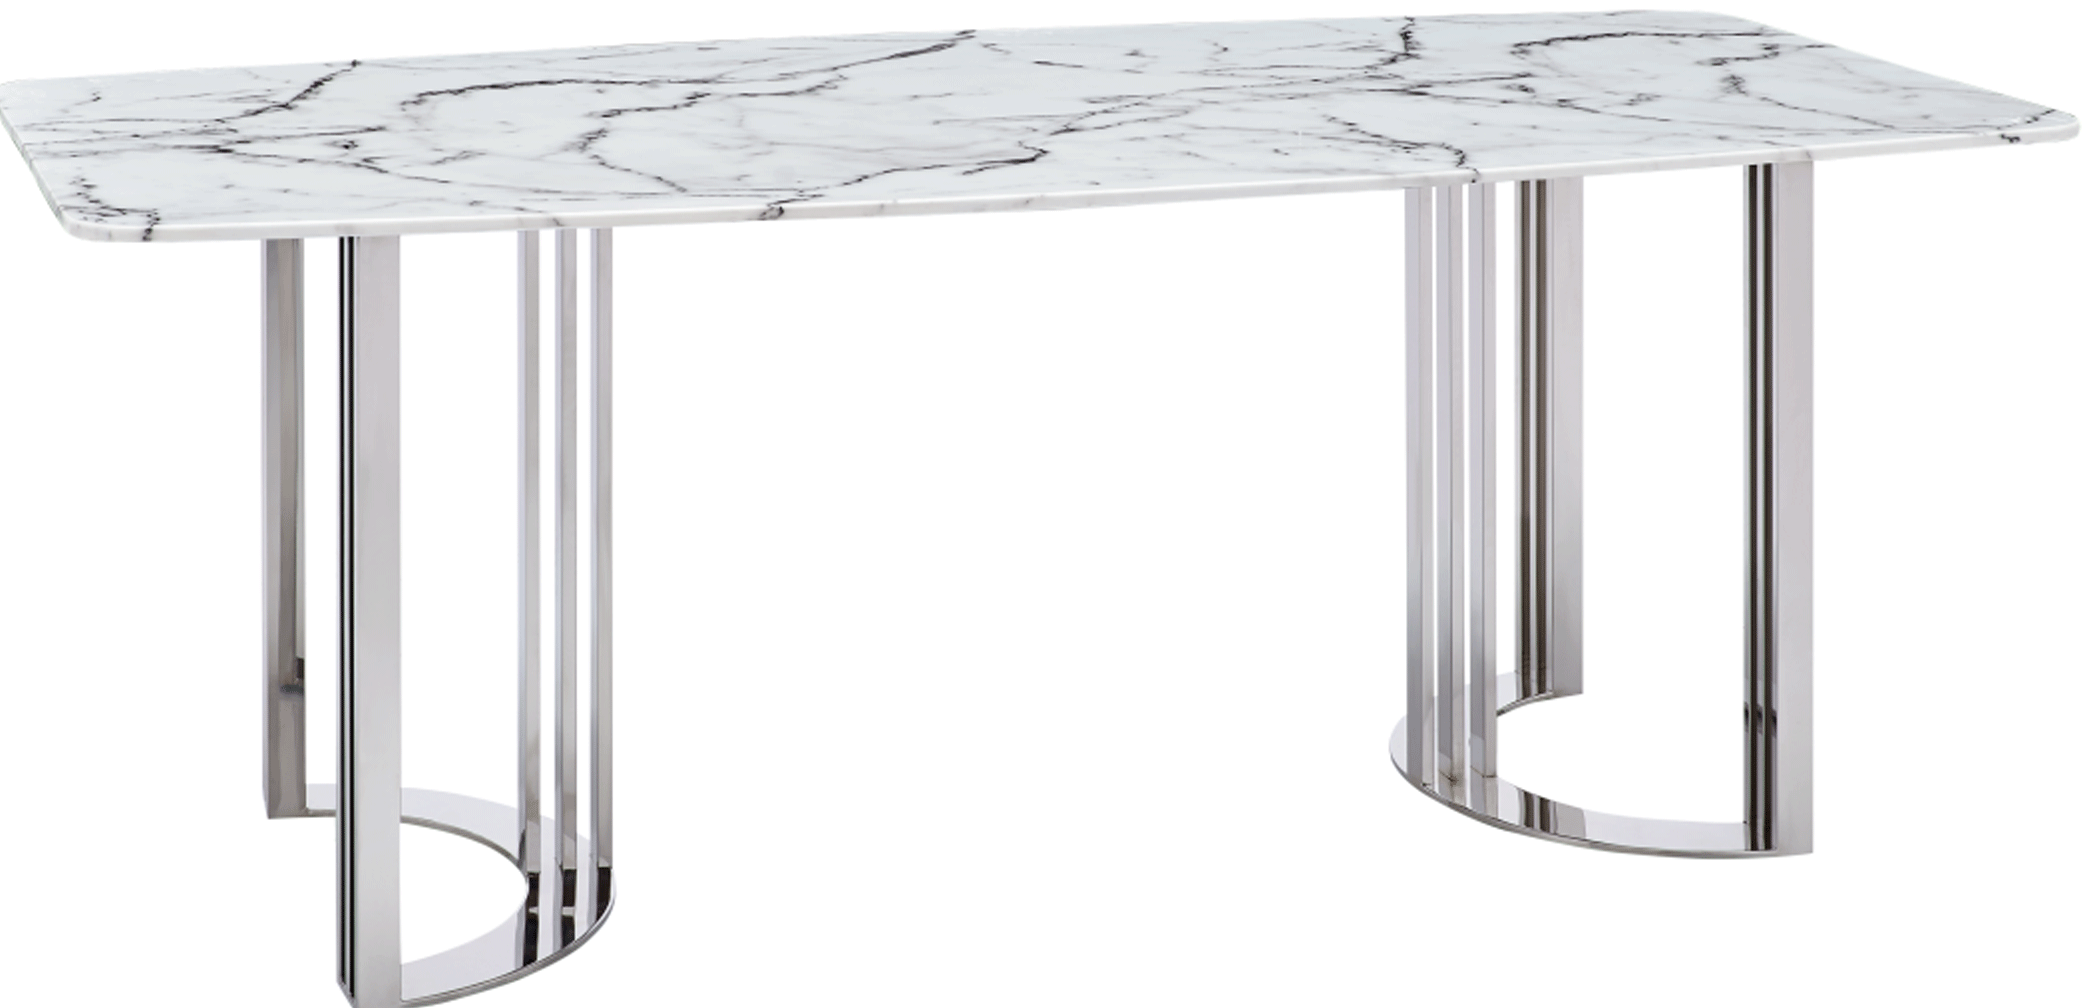 Dining Room Furniture Kitchen Tables and Chairs Sets 131 Silver Marble Dining Table